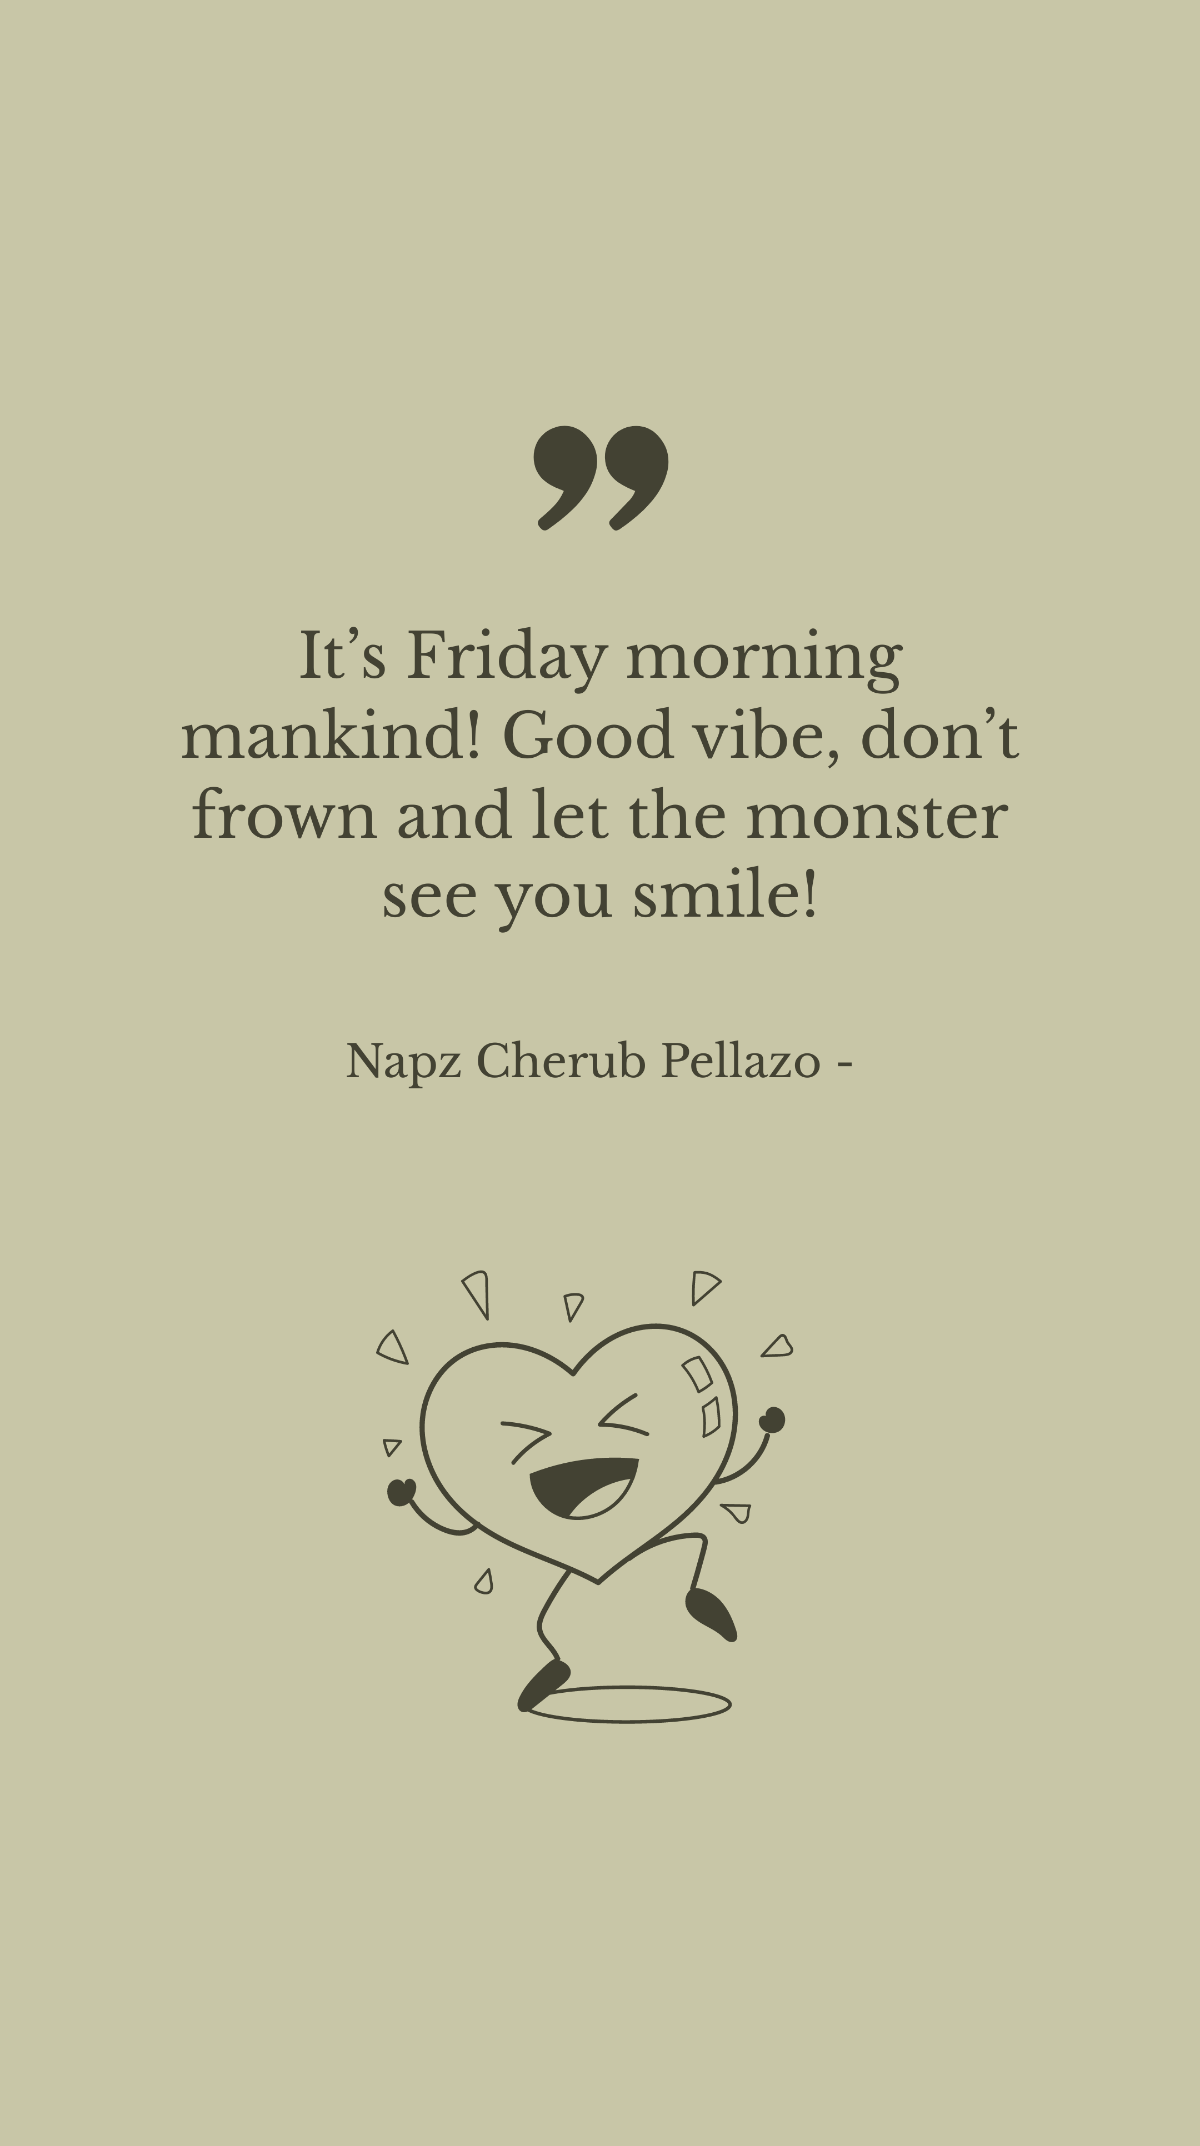 Free Napz Cherub Pellazo - It’s Friday morning mankind! Good vibe, don’t frown and let the monster see you smile! Template